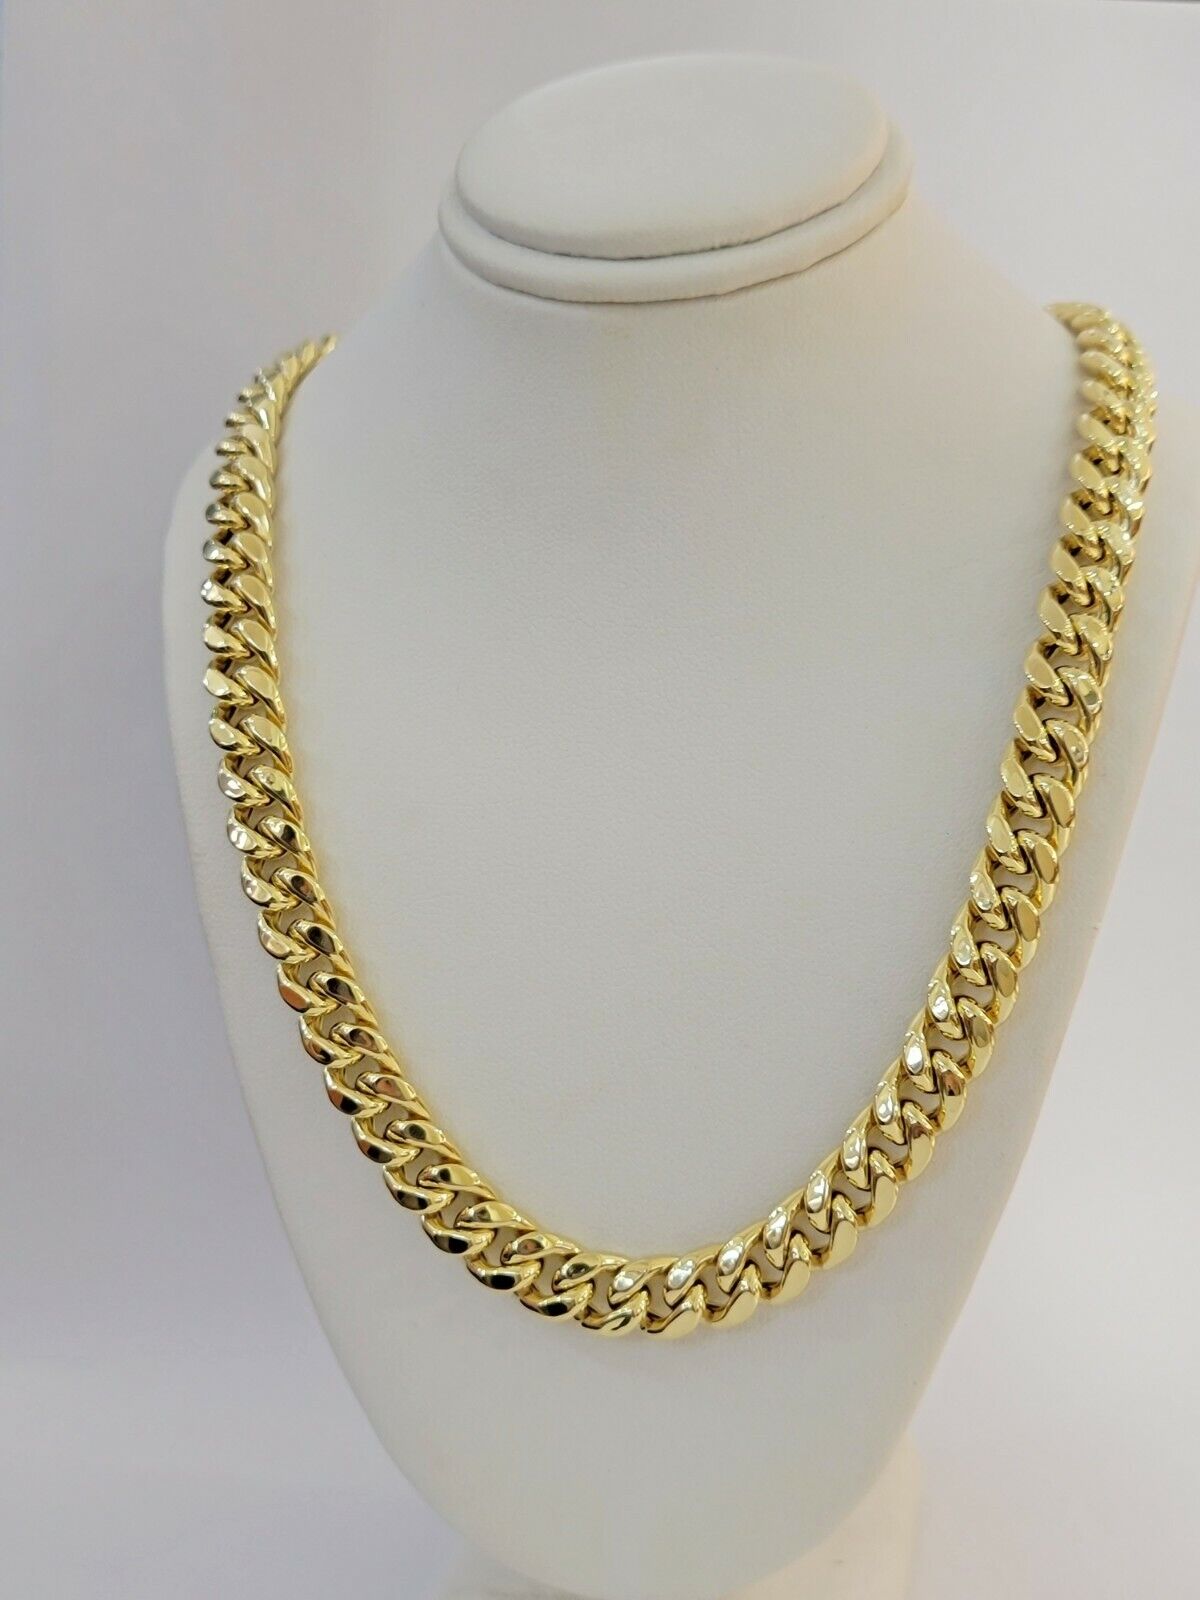 Real 14k Gold Chain 24 Inch Miami Cuban Link Necklace 9mm Strong Men 14KT Gold